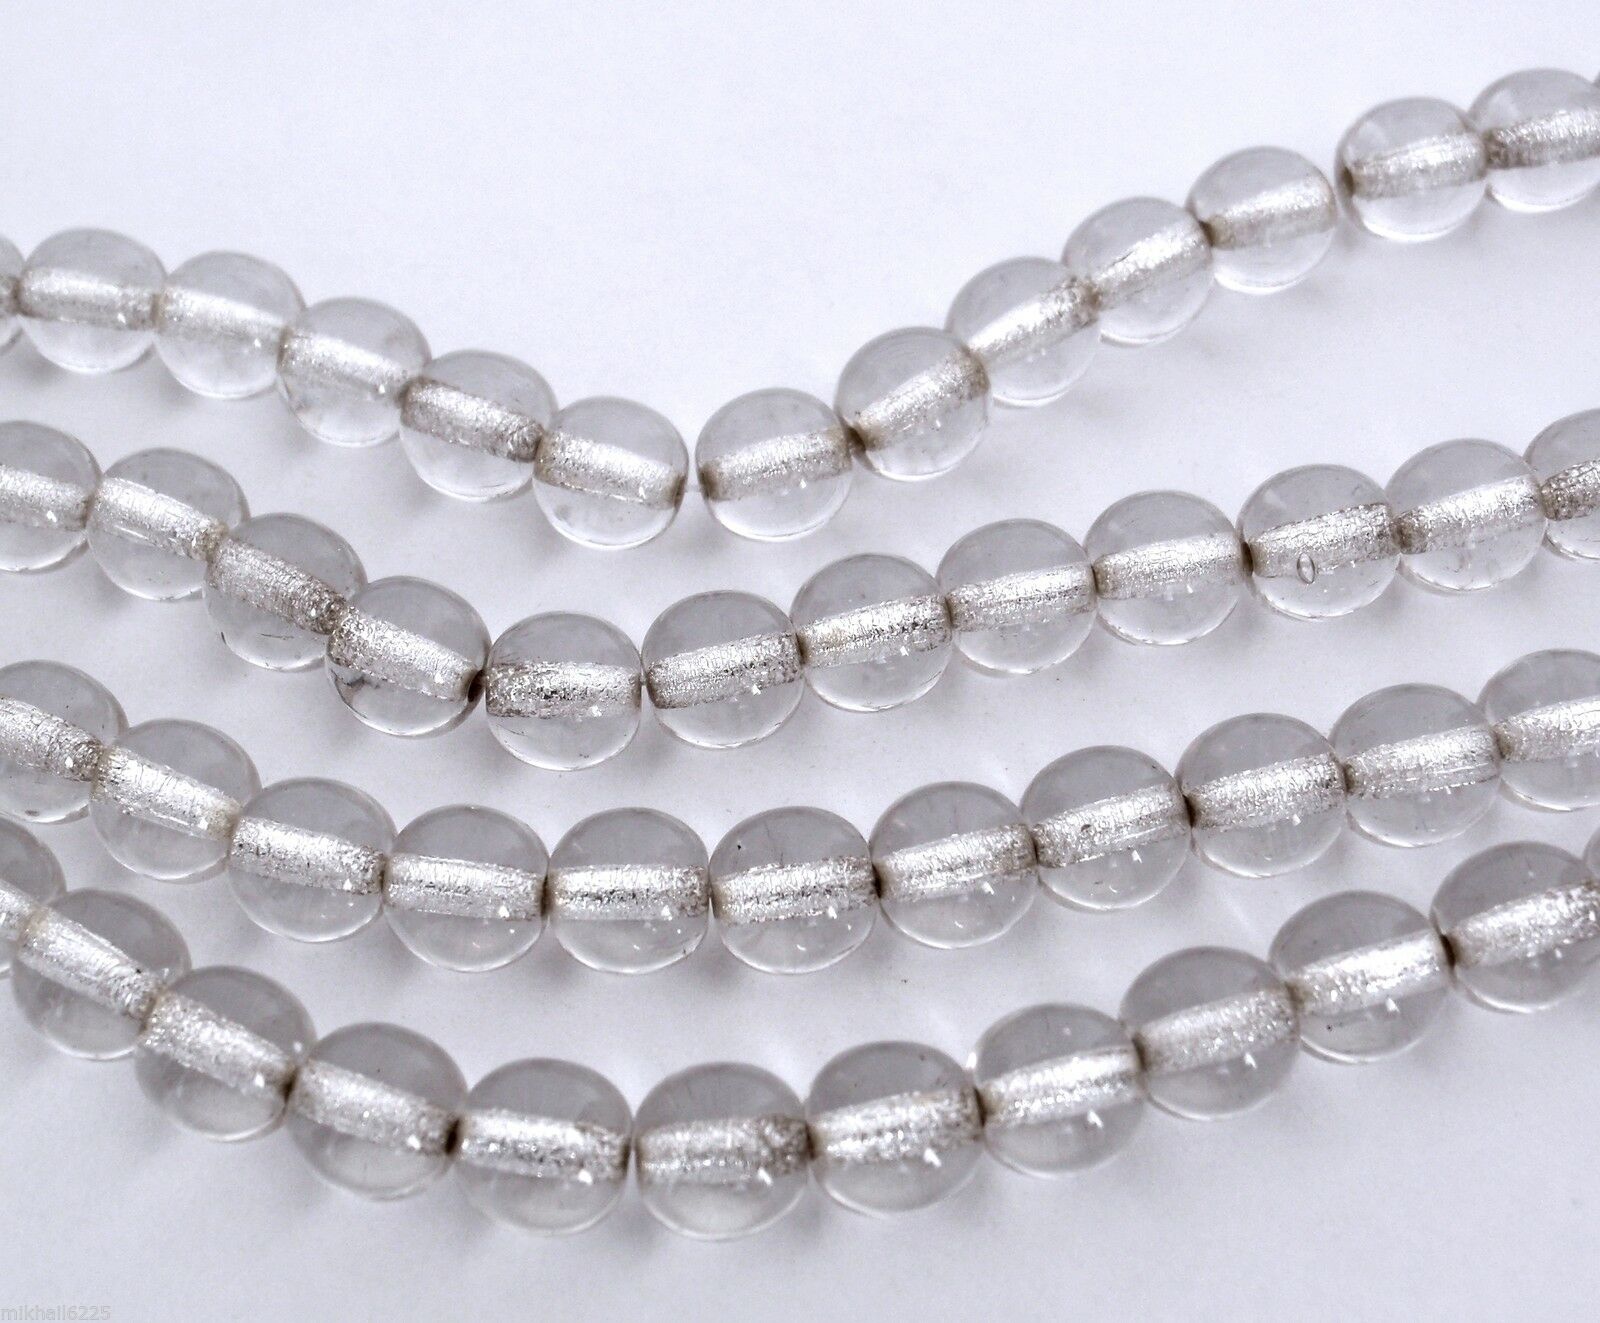 Primary image for 50 6mm Czech Glass Round Beads: Crystal - Silver Lined